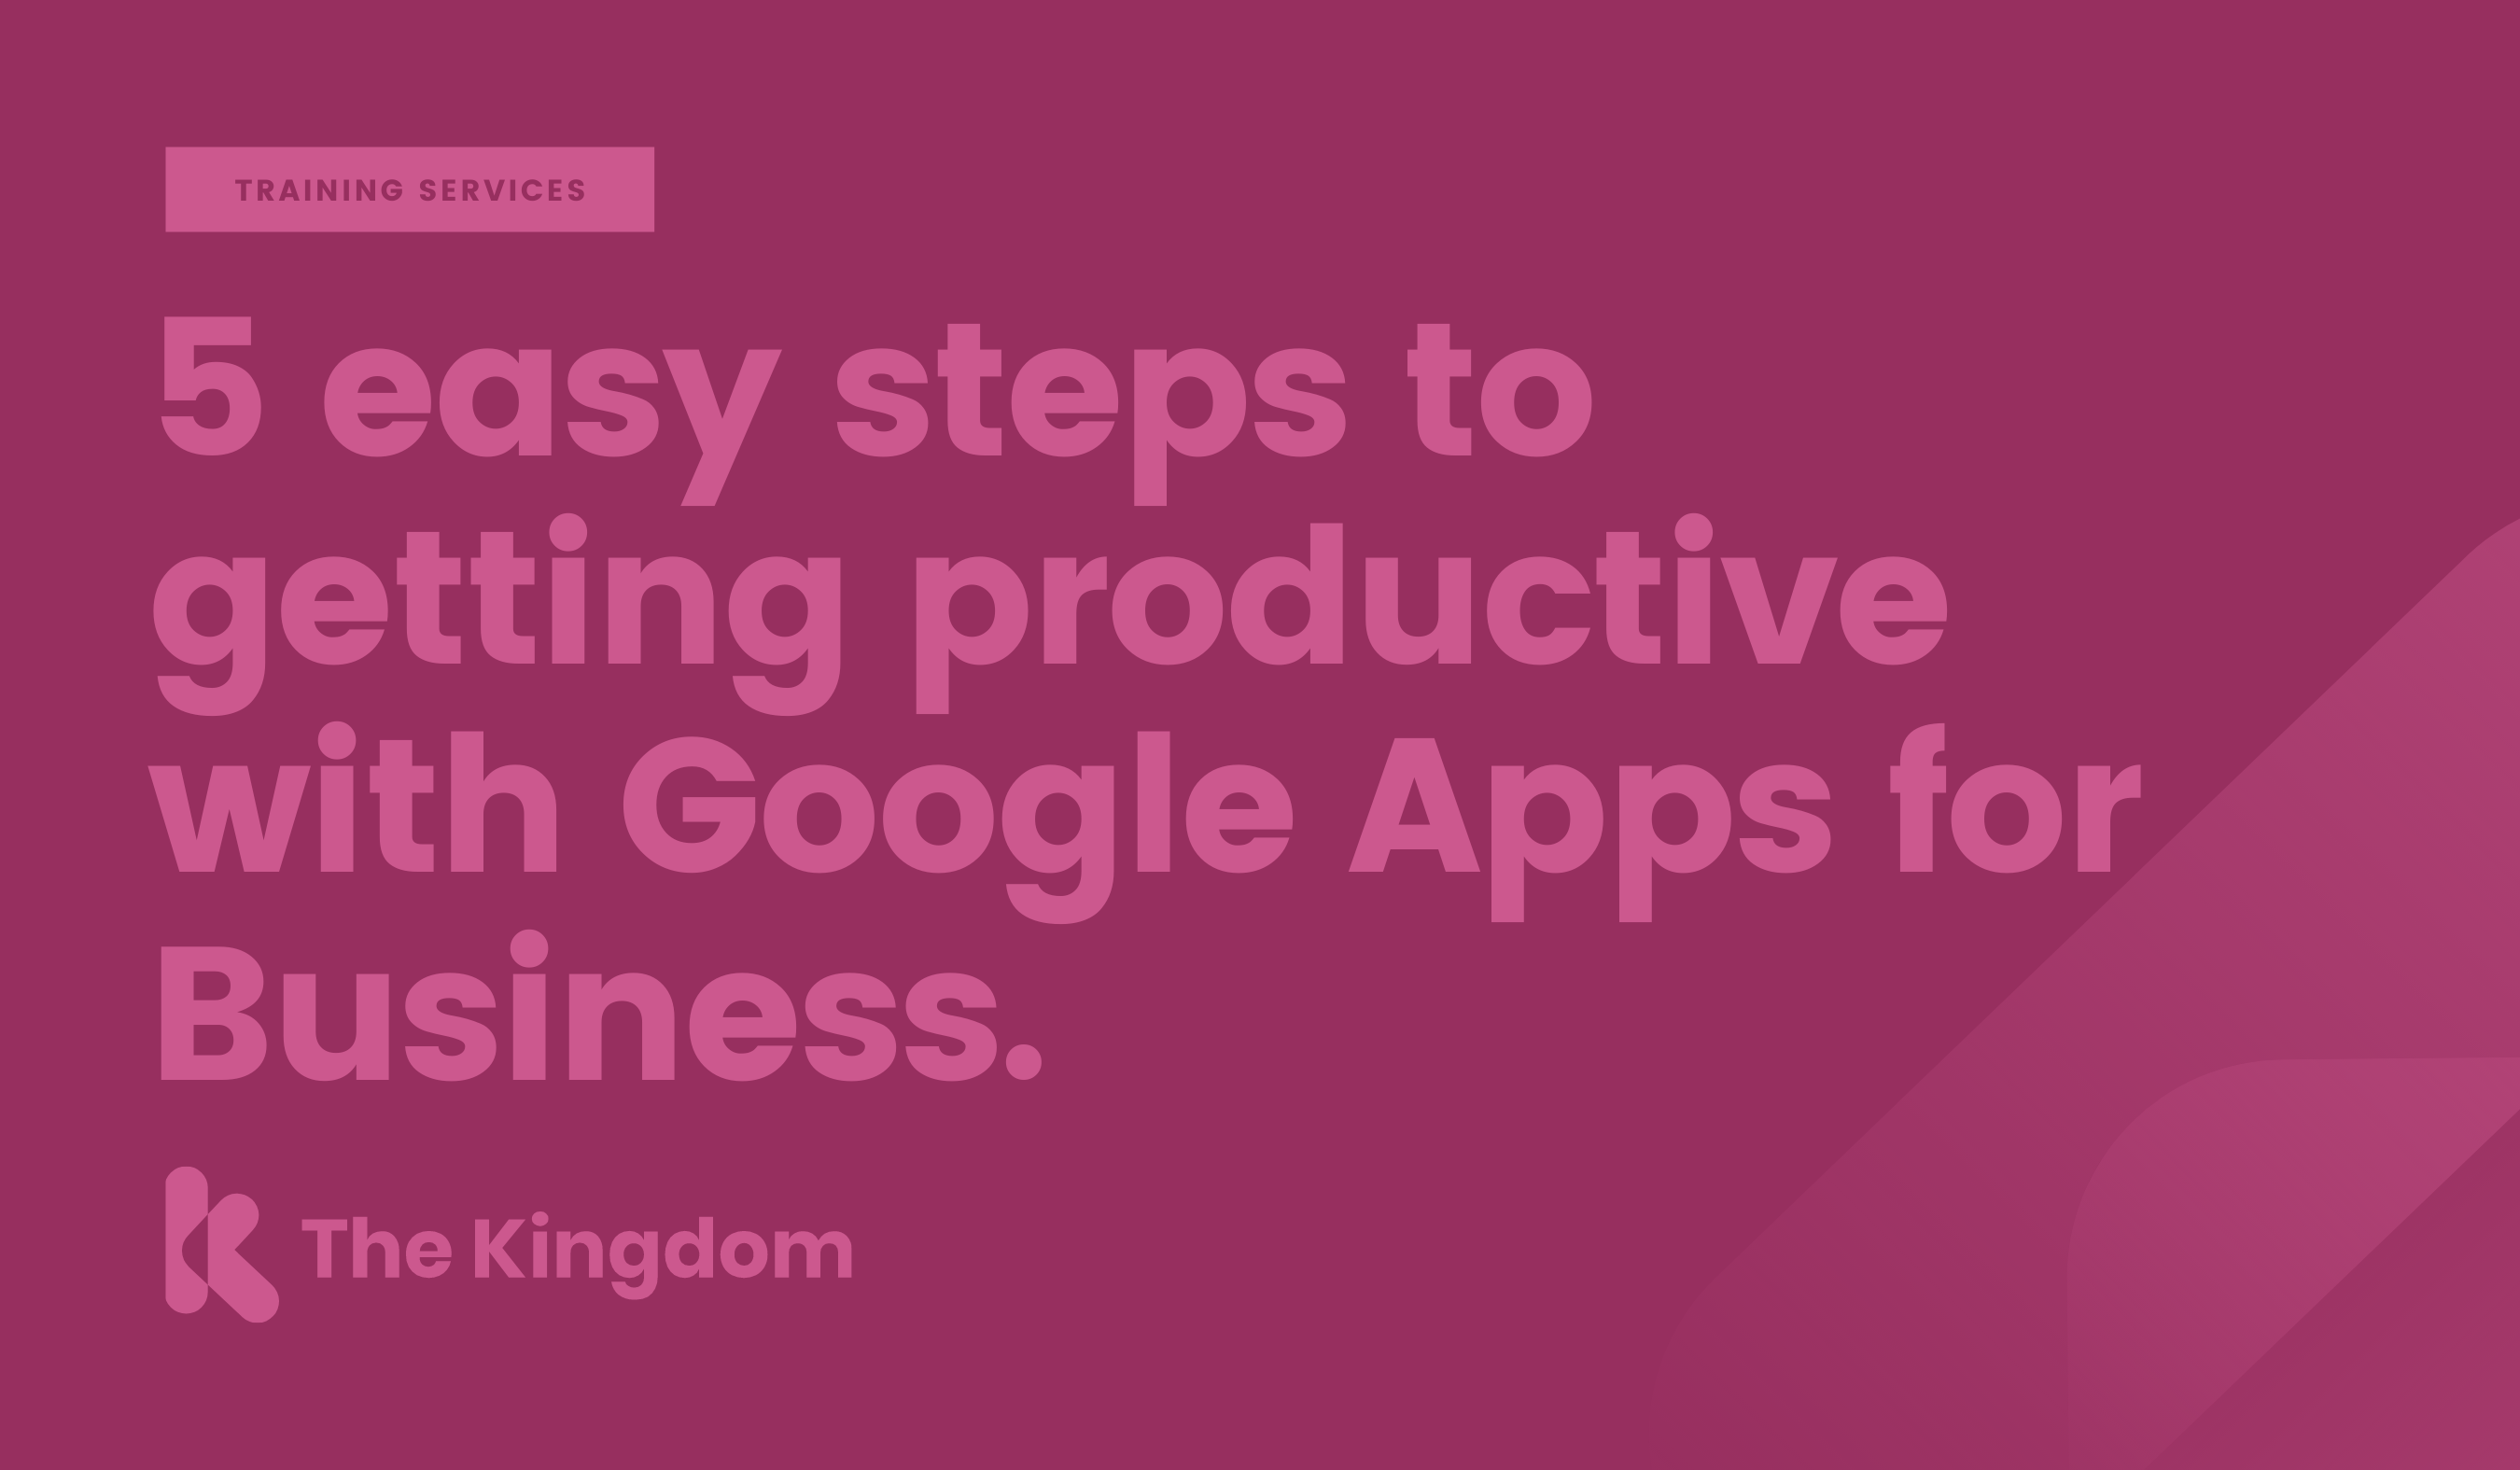 5 easy steps to getting productive with Google Apps for Business